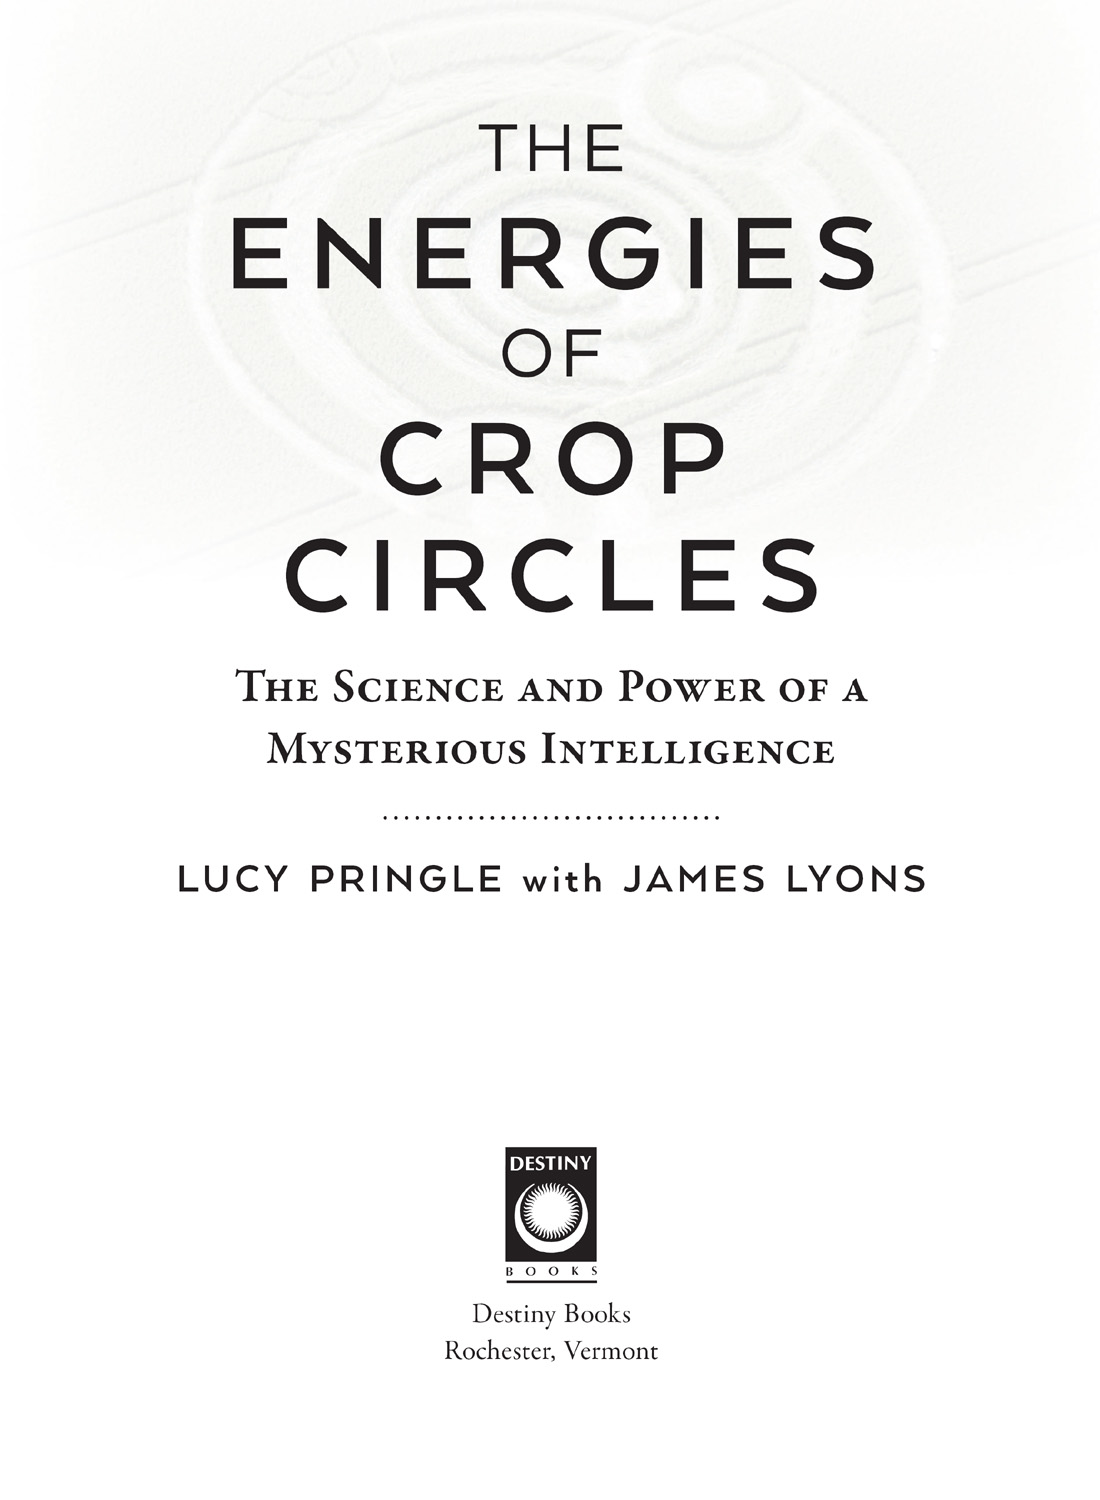 THE ENERGIES OF CROP CIRCLES To fly with Lucy Pringle over a crop circle - photo 2